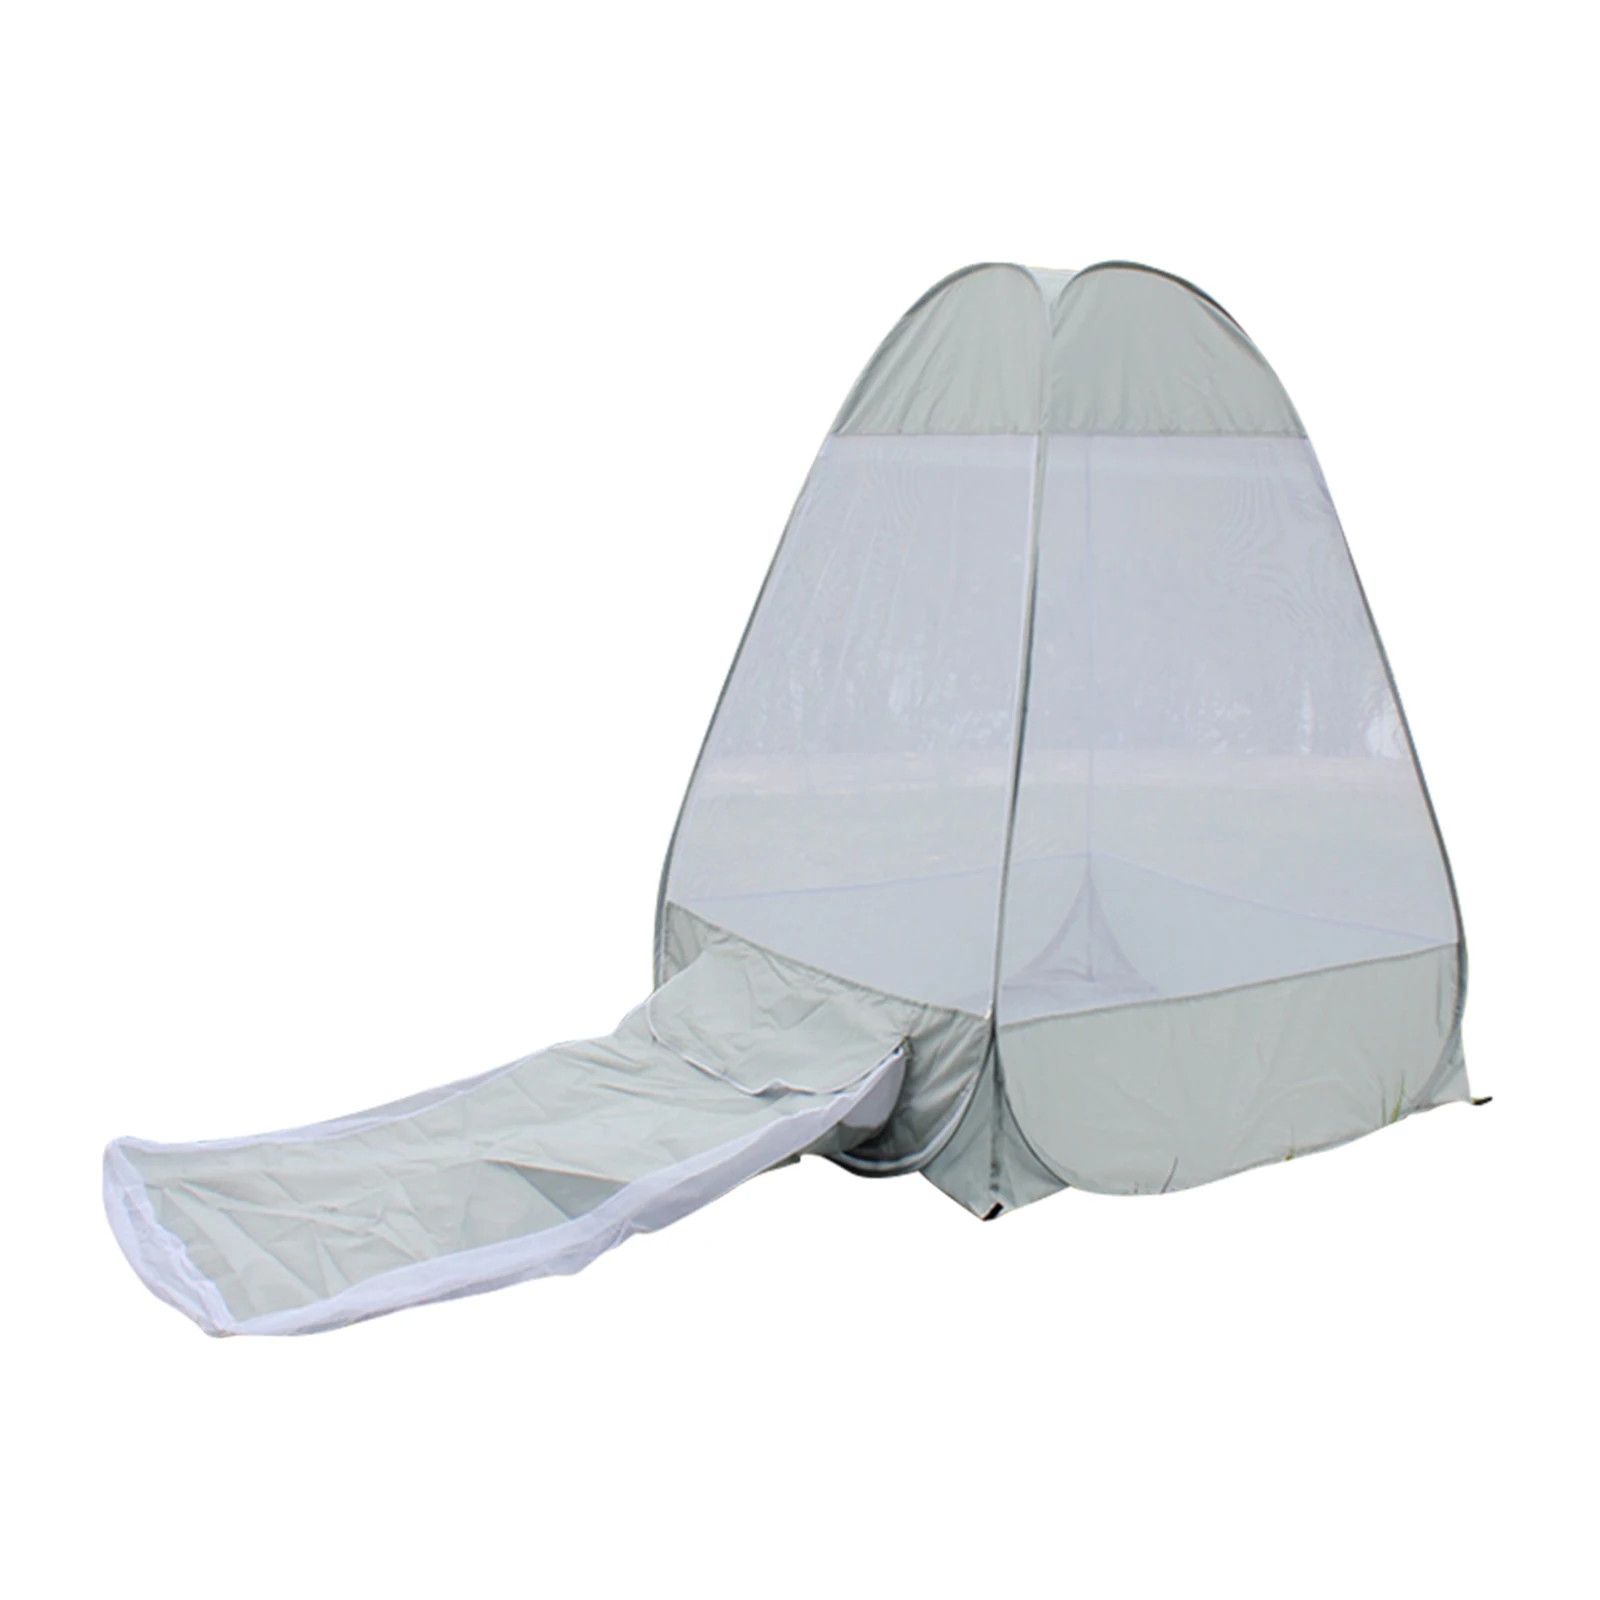 Summer Meditation Tent Mosquito Mesh Tent 1-Person Mosquito Net Tent Gifts for Friends Family Playing Meditation Yoga